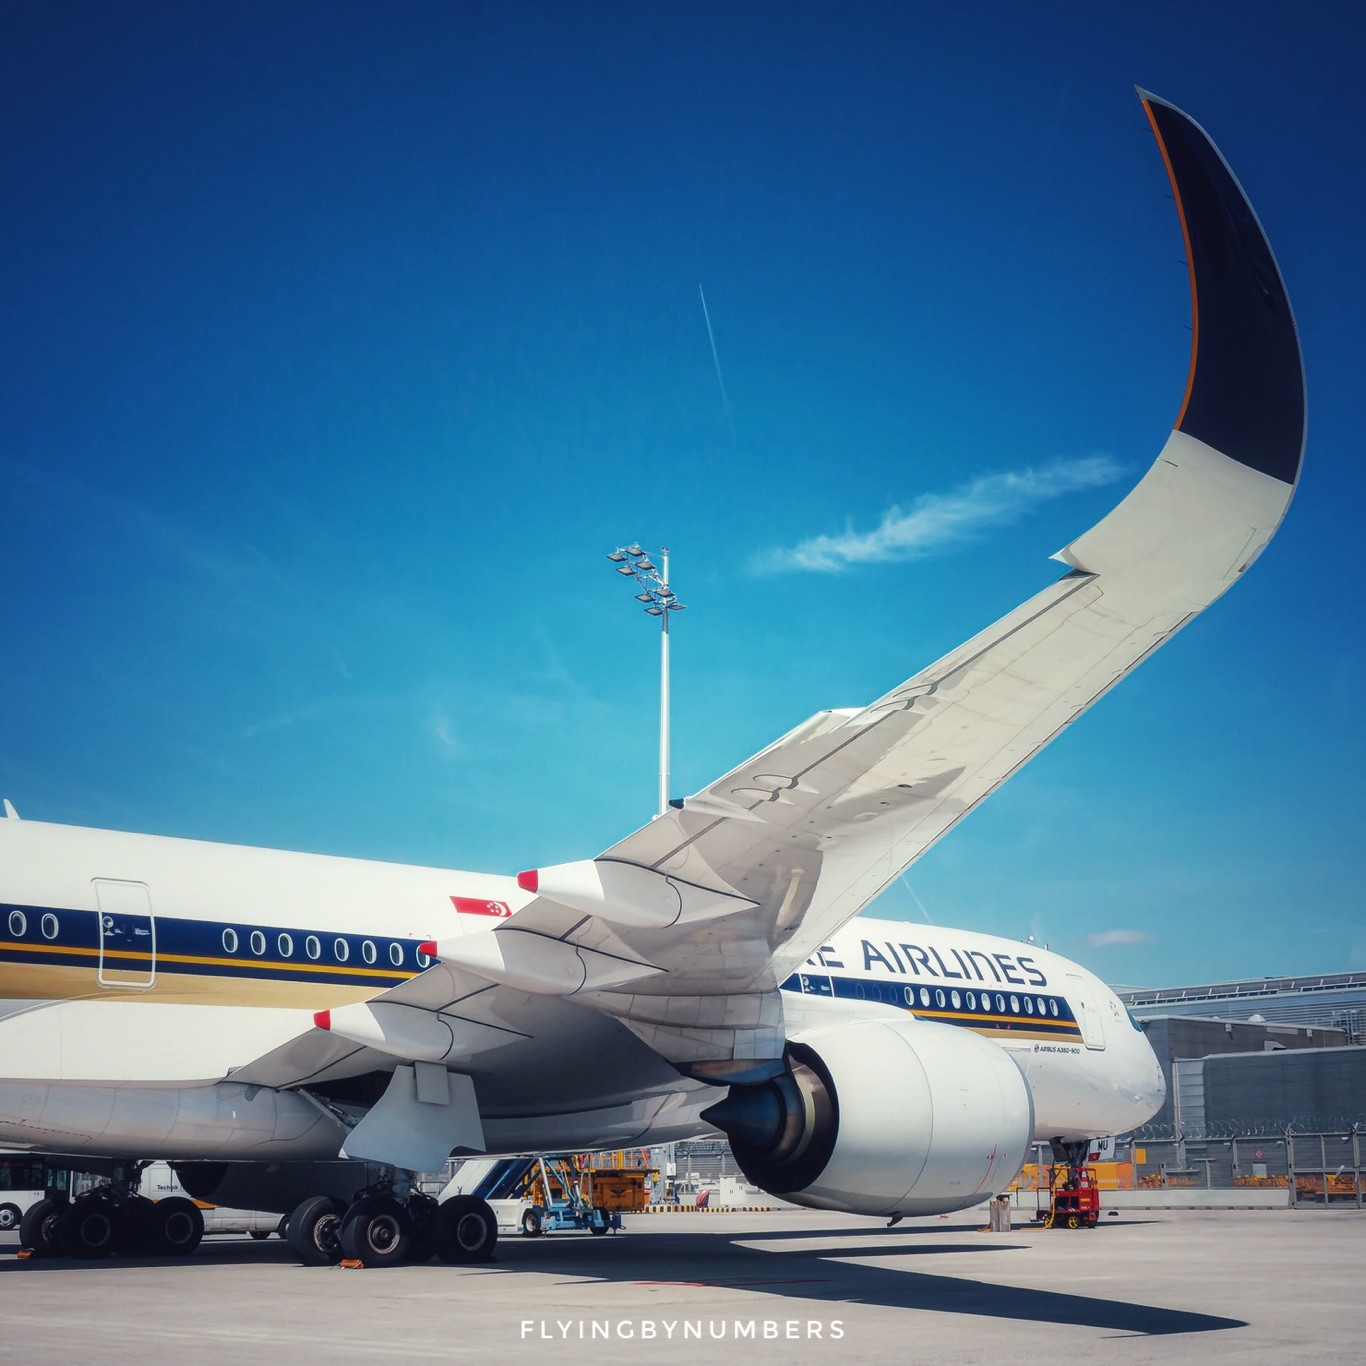 Singapore airlines A350 the fastest airbus so far